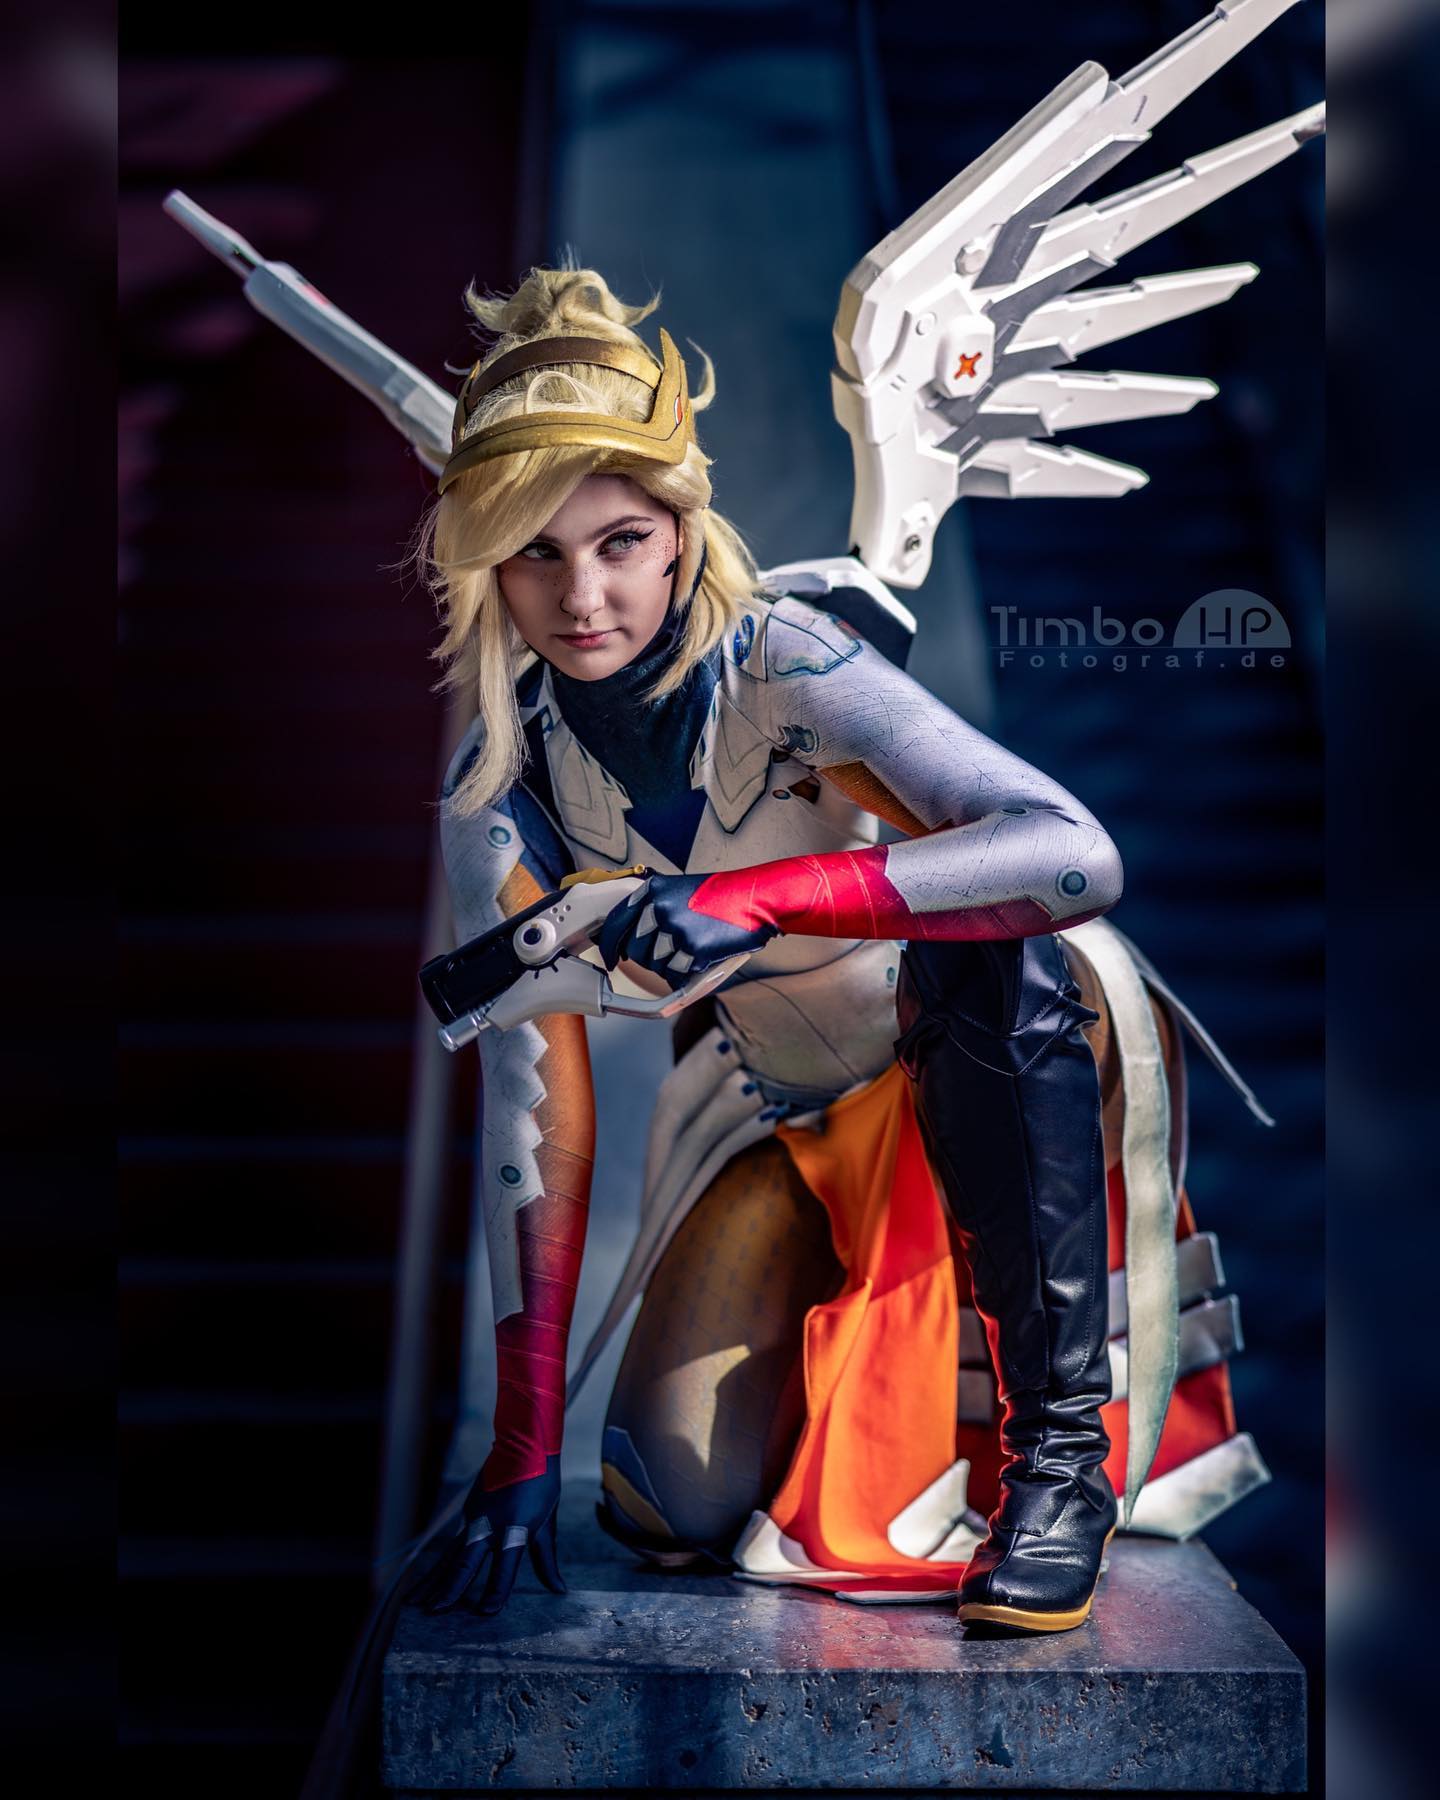 I’m watching over you! ✨
-
LOOK AT ME GUYS AAAHH 🥲 @timbo_hp_cosplayfotograf really worked his magic with this picture aaahh it looks super awesome!! 🥹💖 lbm this year was so fun! <3
-
tags!
#mercy #mercyoverwatch #mercycosplay #overwatch #overwatchmercycosplay #overwatchcosplay #overwatch2 #cosplay #cosplayersofinstagram #cosplaygirl #cosplaying #gaming #gamecosplay #overwatchmercy #ow #ow2